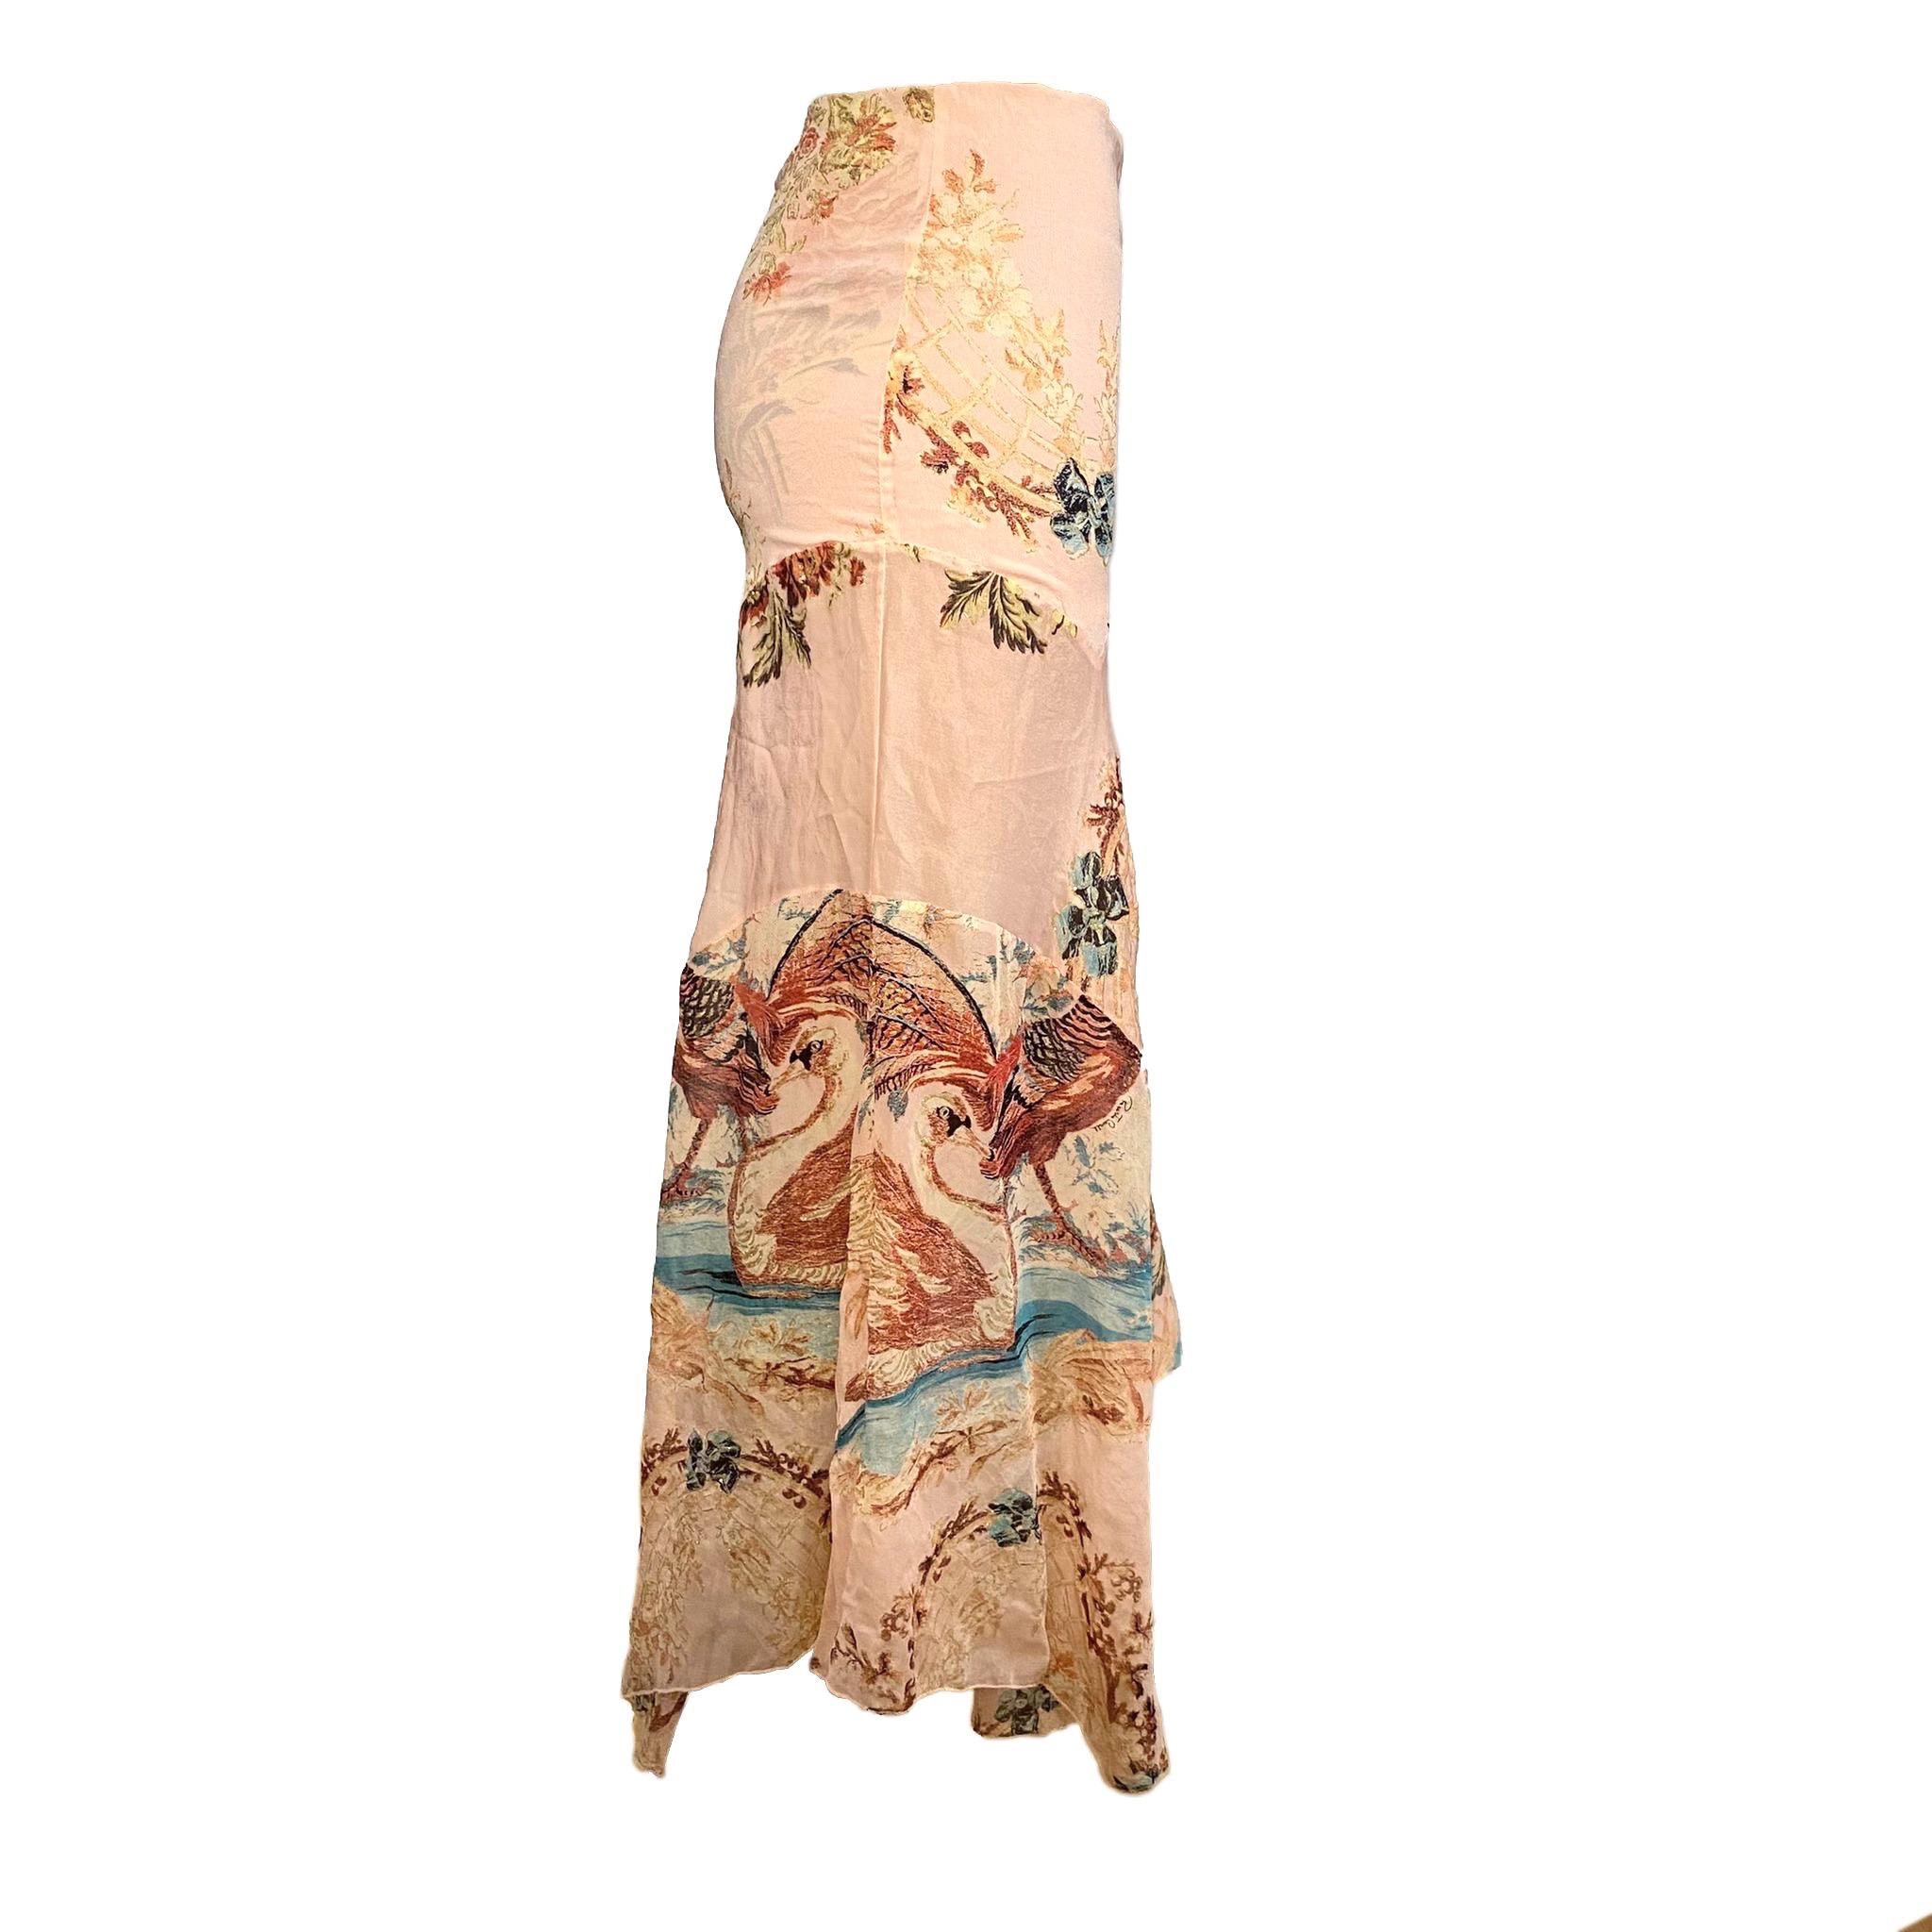 Roberto Cavalli low waist bias cut maxi skirt with allover floral and animal silk jacquard ornaments (including swans and peacocks) from the Spring/Summer 2003 collection.

Size S 

Waistline: 72 cm / 28,3 inch

Hip: 84 cm / 33 inch

Length: 83 cm /